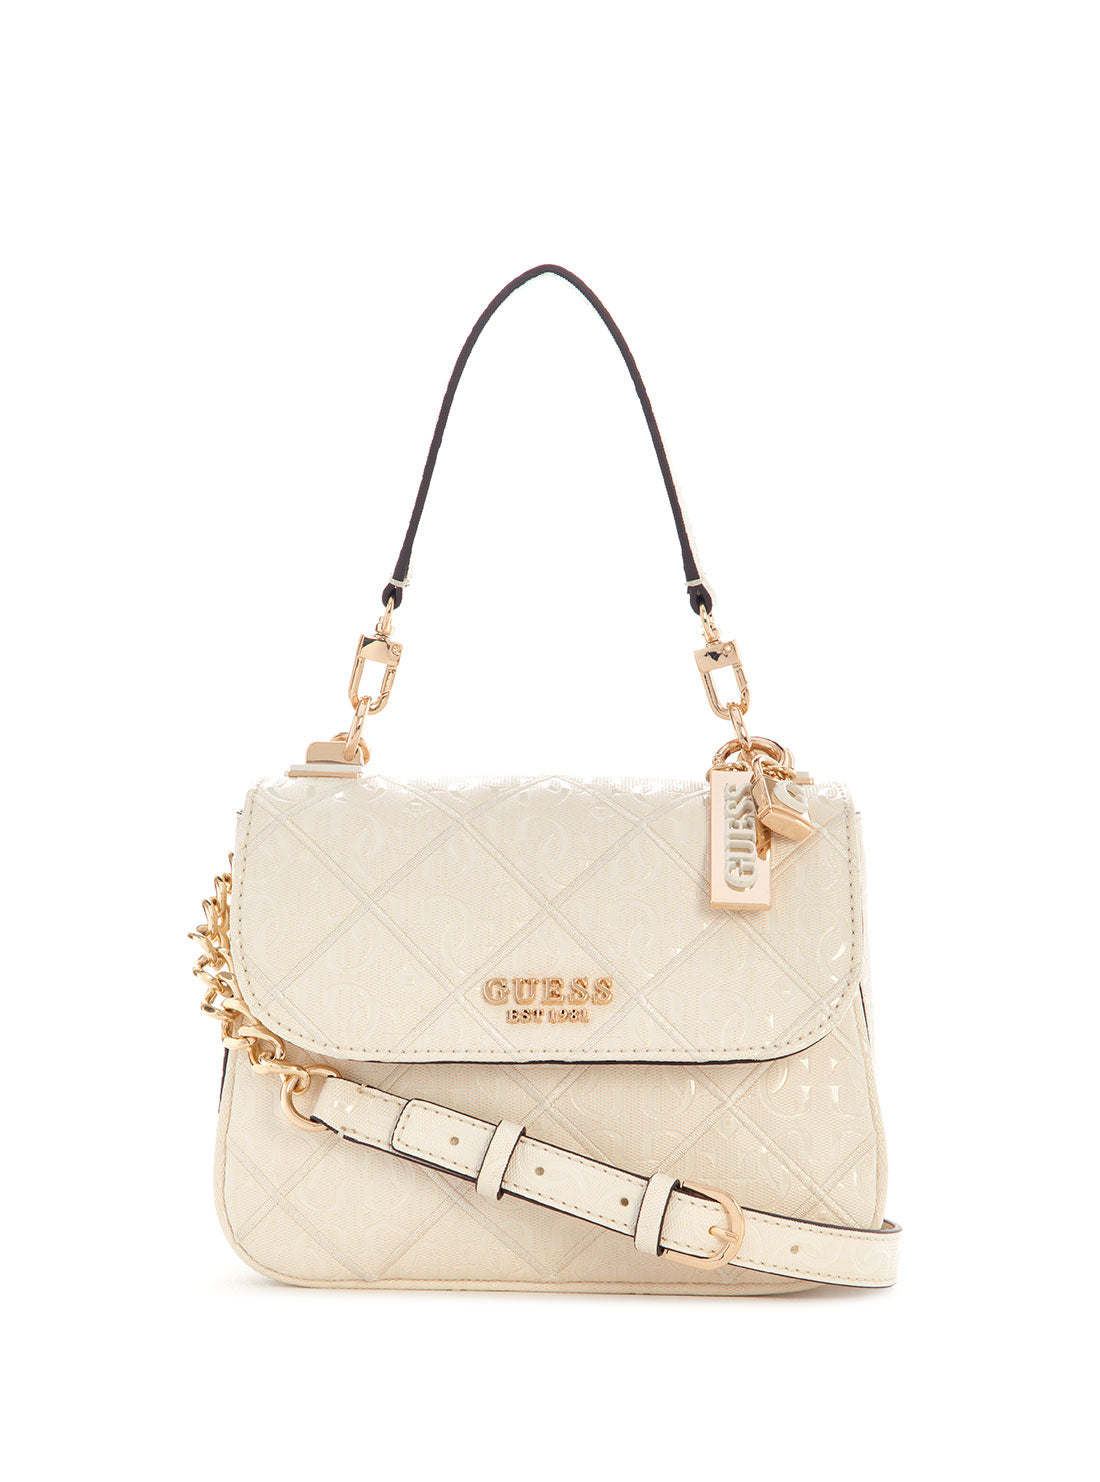 GUESS Women's Stone Caddie Crossbody Shoulder Bag GG878319 Front View